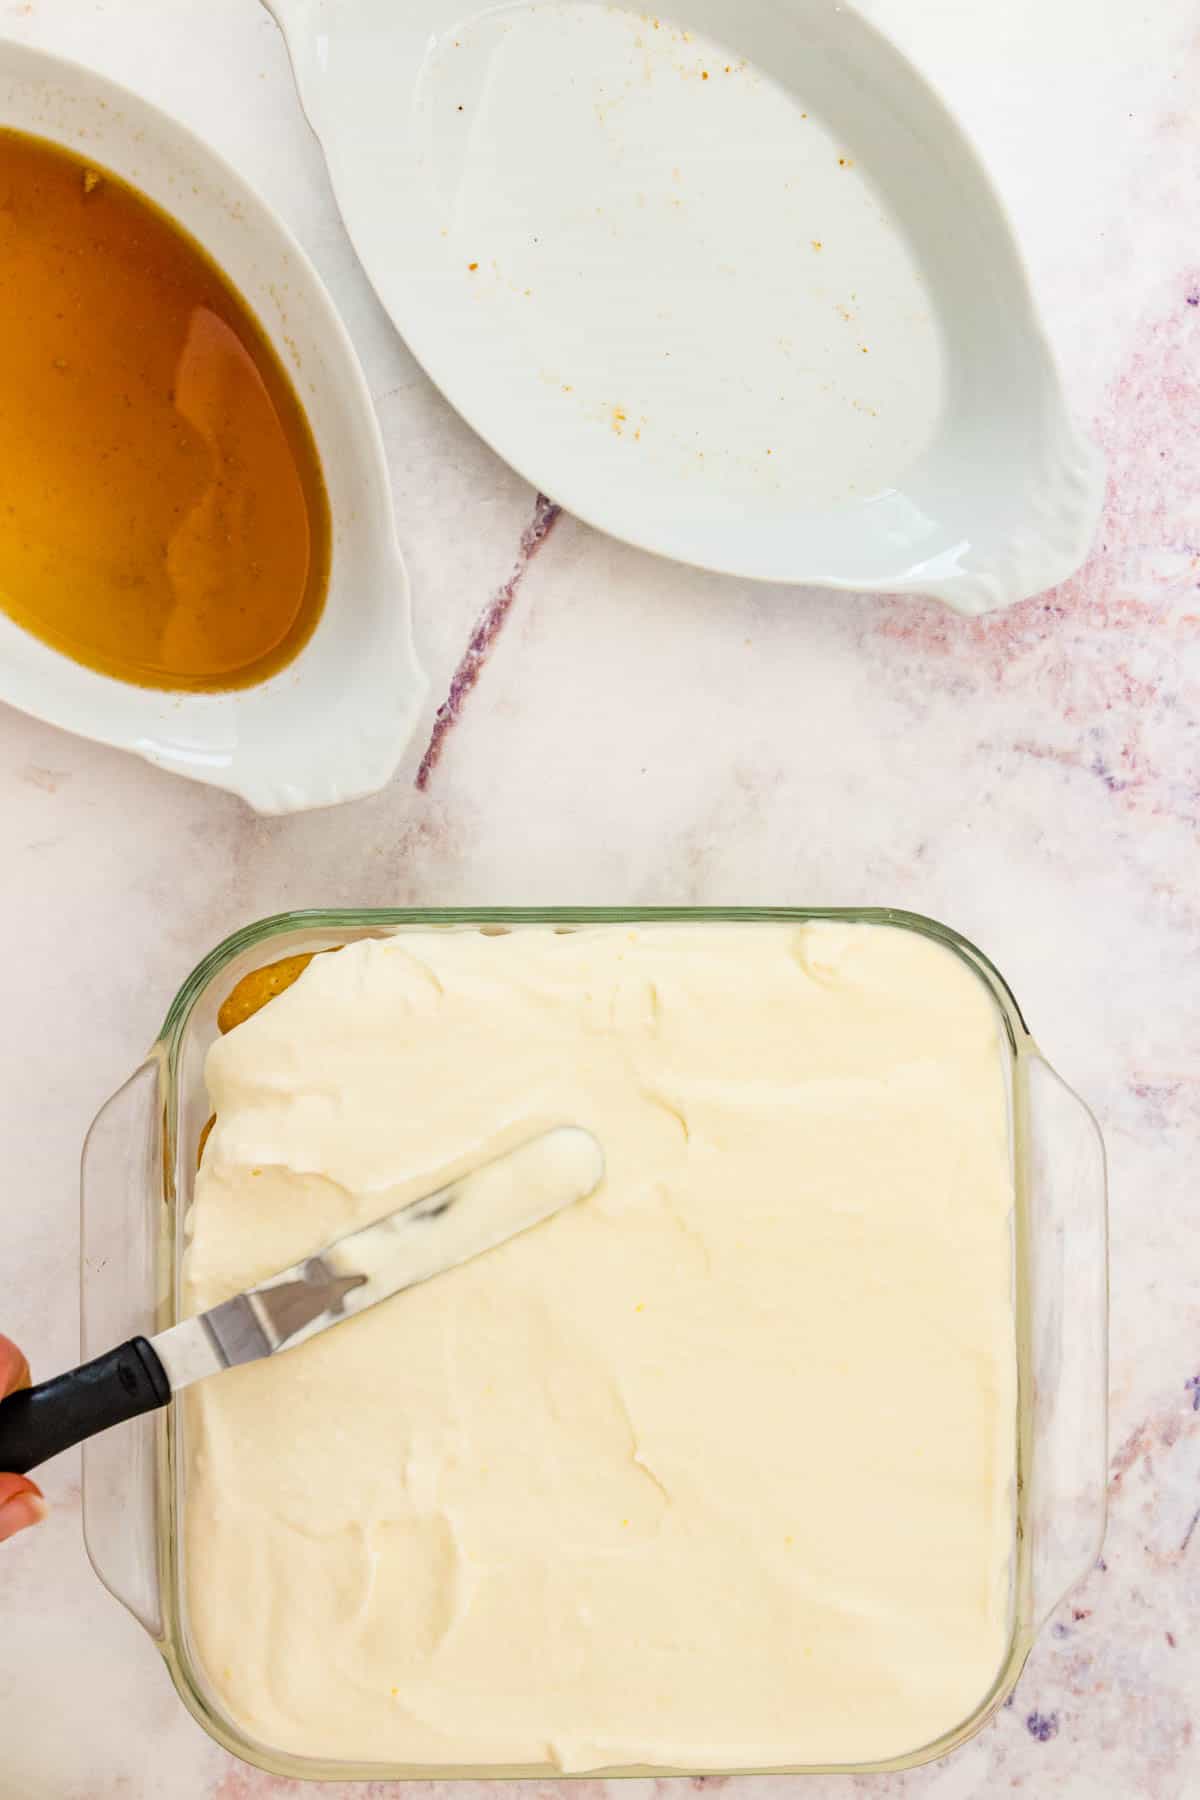 A final layer of mascarpone is spread over the other tiramisu layers in a glass baking dish.